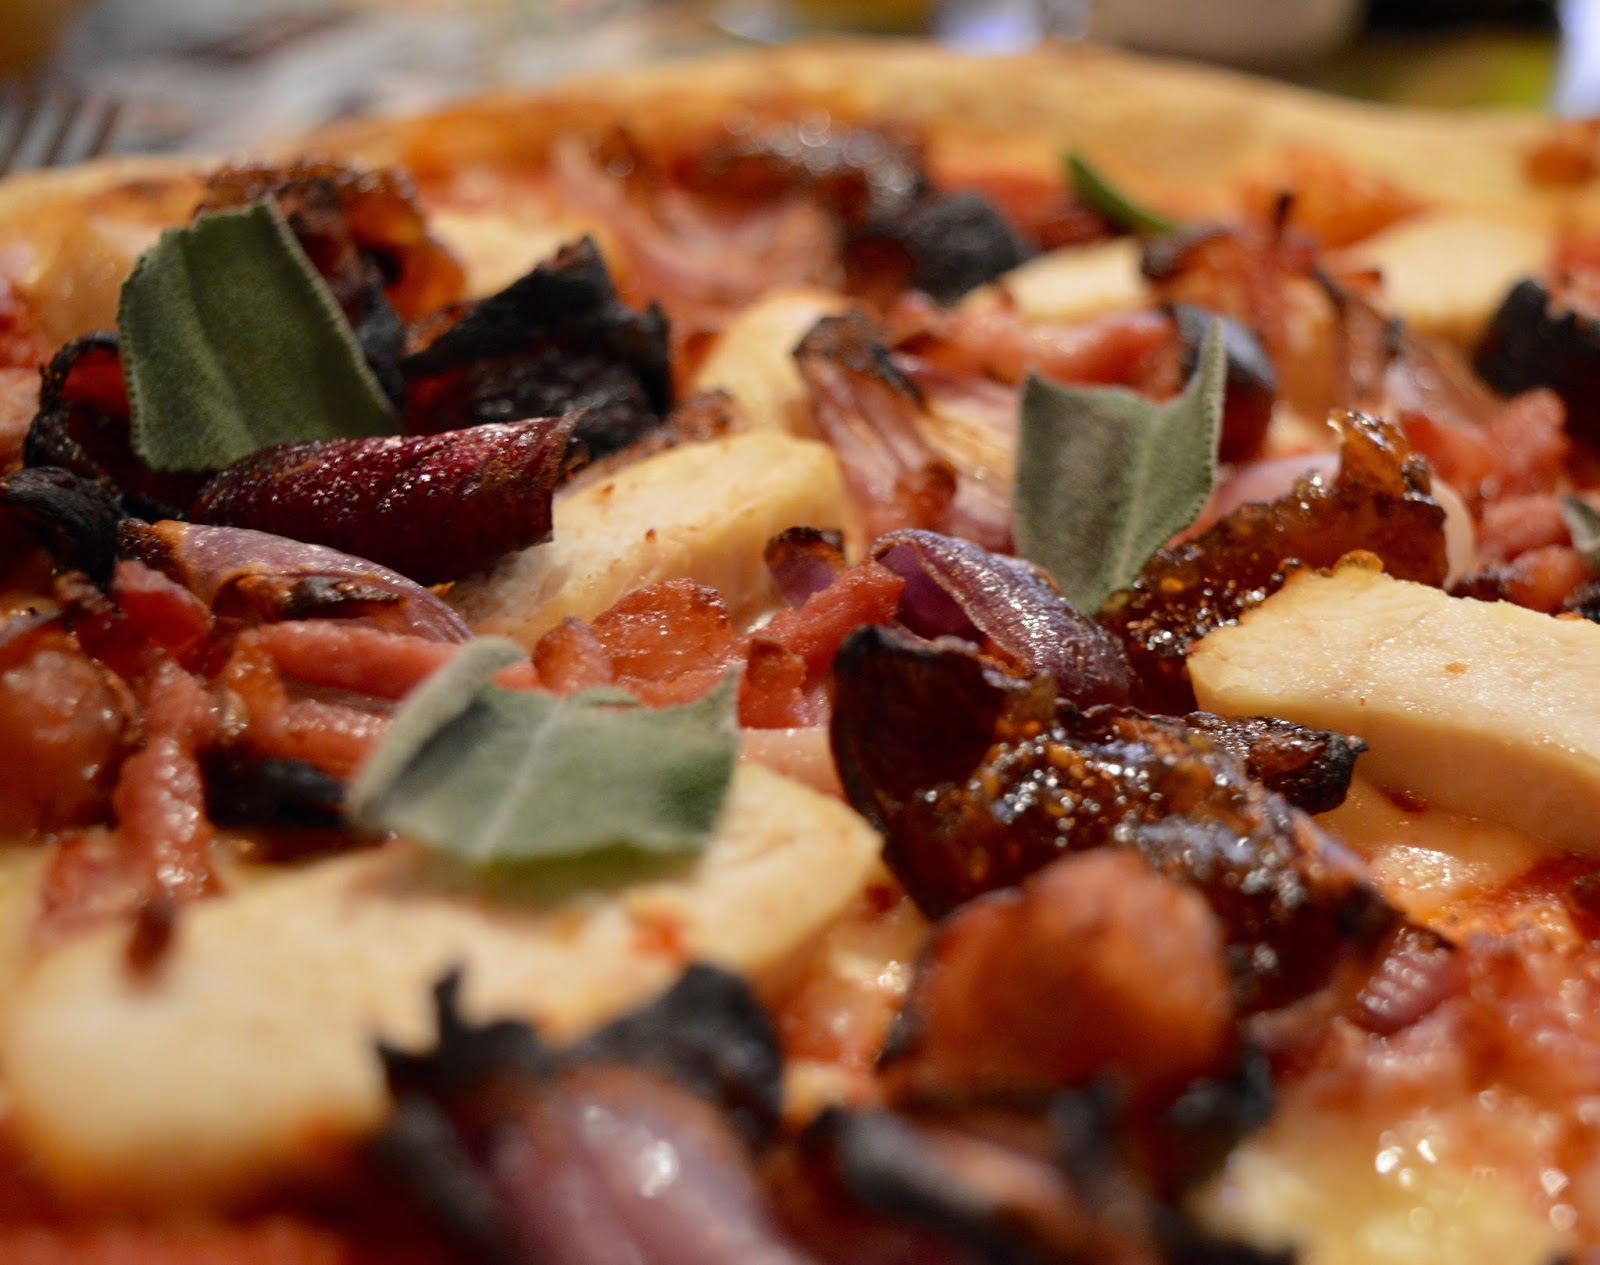 Bella Italia at intu Eldon Square Newcastle | Children's Menu Review - Christmas pizza with pigs and blankets